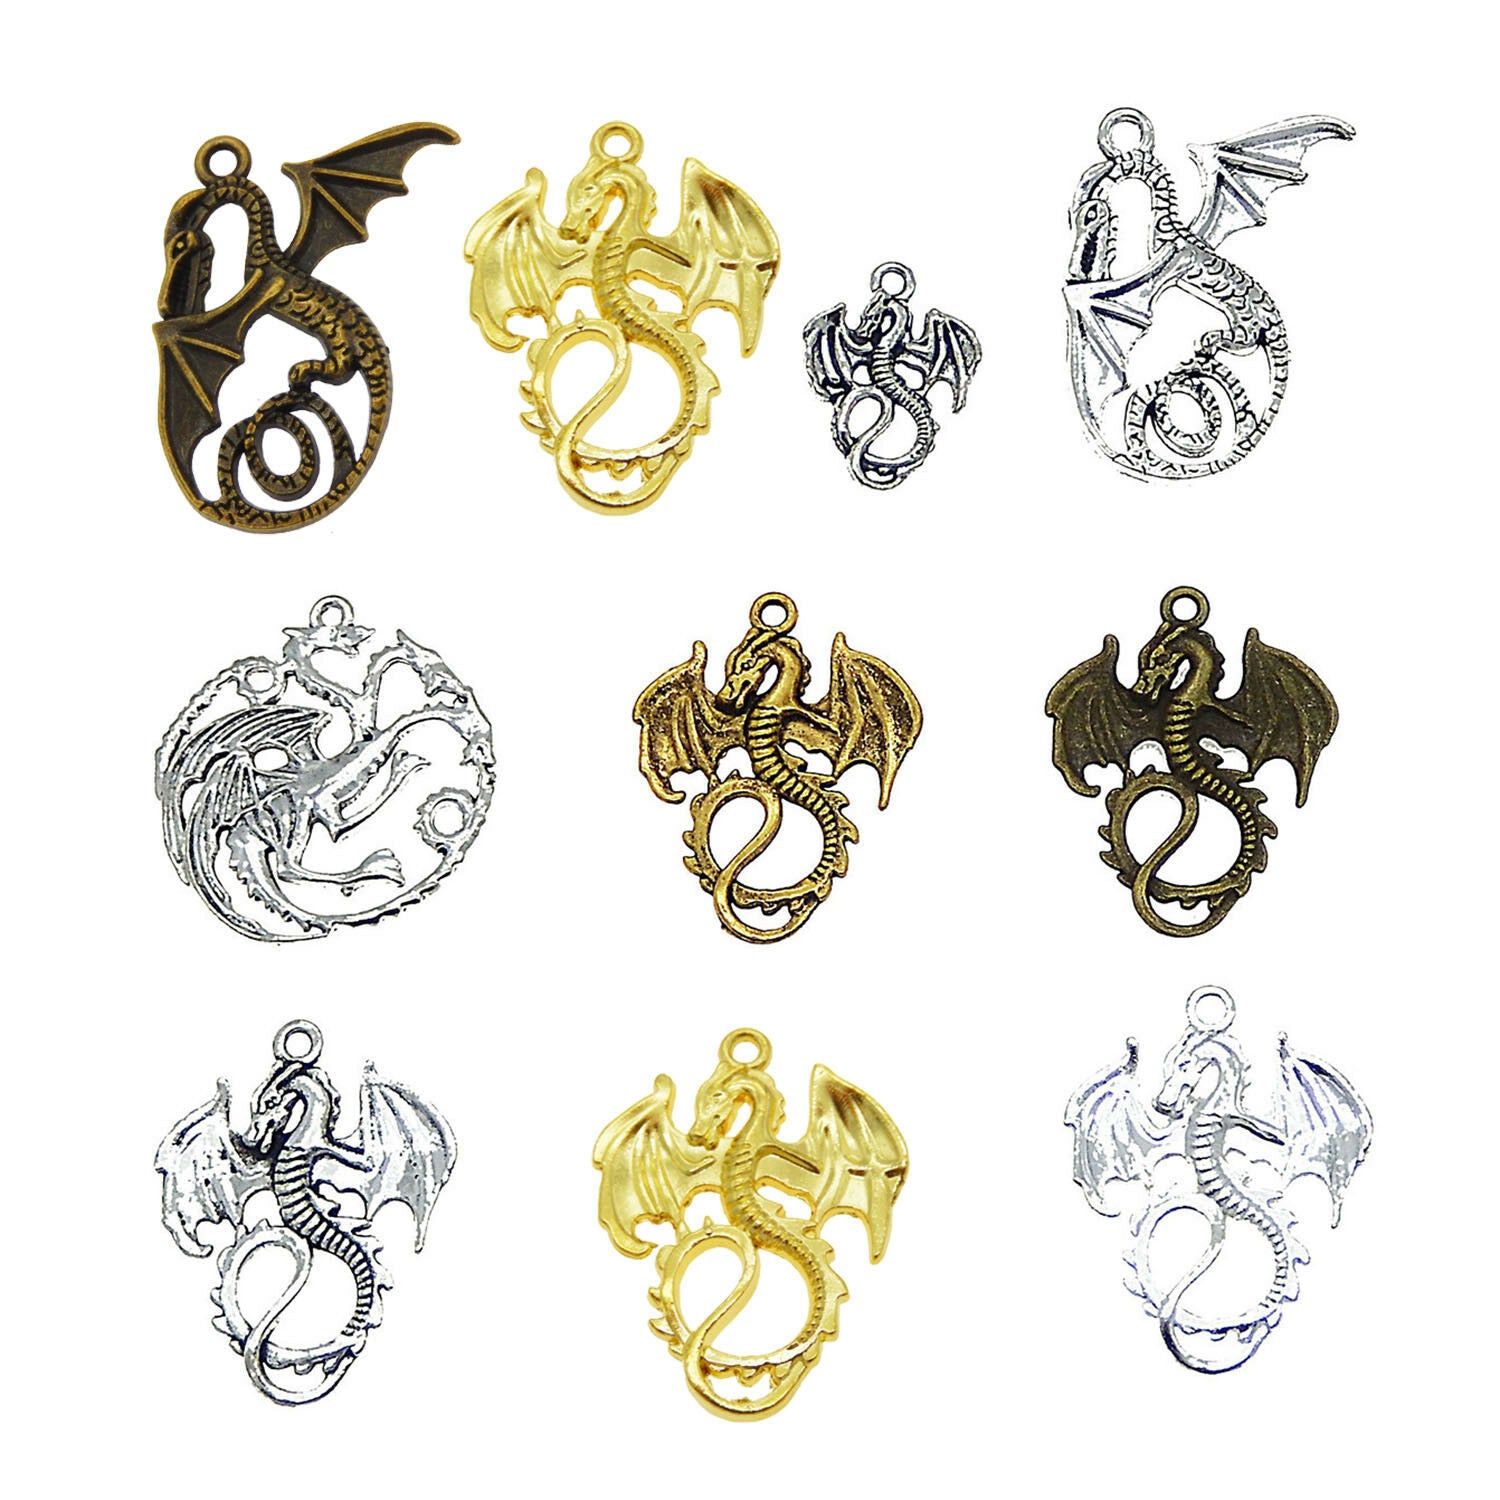 10 Mix Flying Dragon Pendant Winged Alloy Charm Bracelet Necklace Craft Jewelry